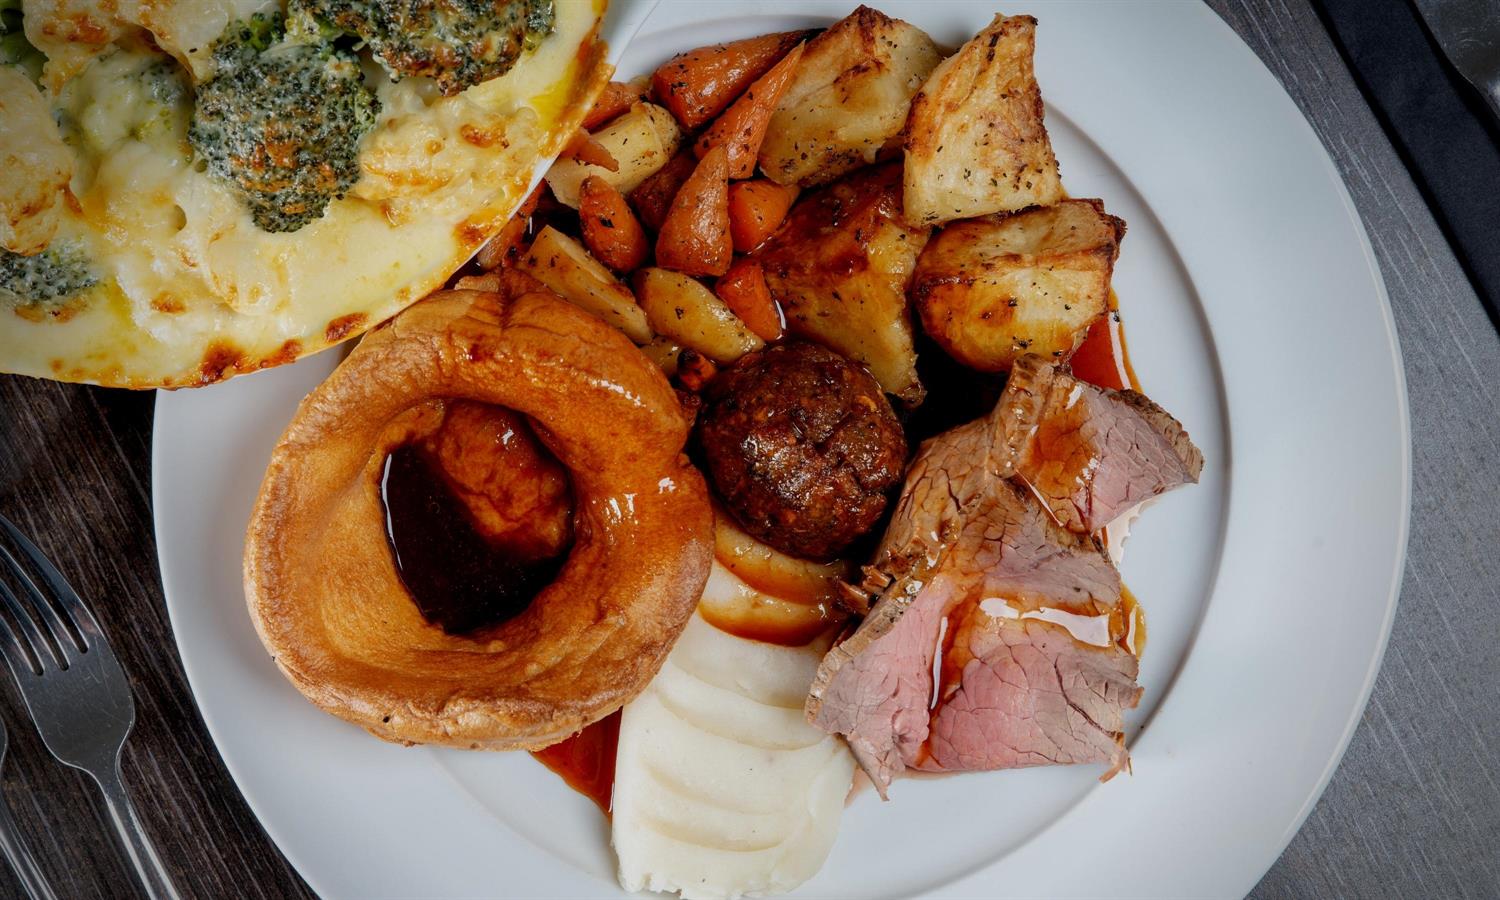 Roast Sunday lunch including roast beef, Yorkshire pudding and vegetables